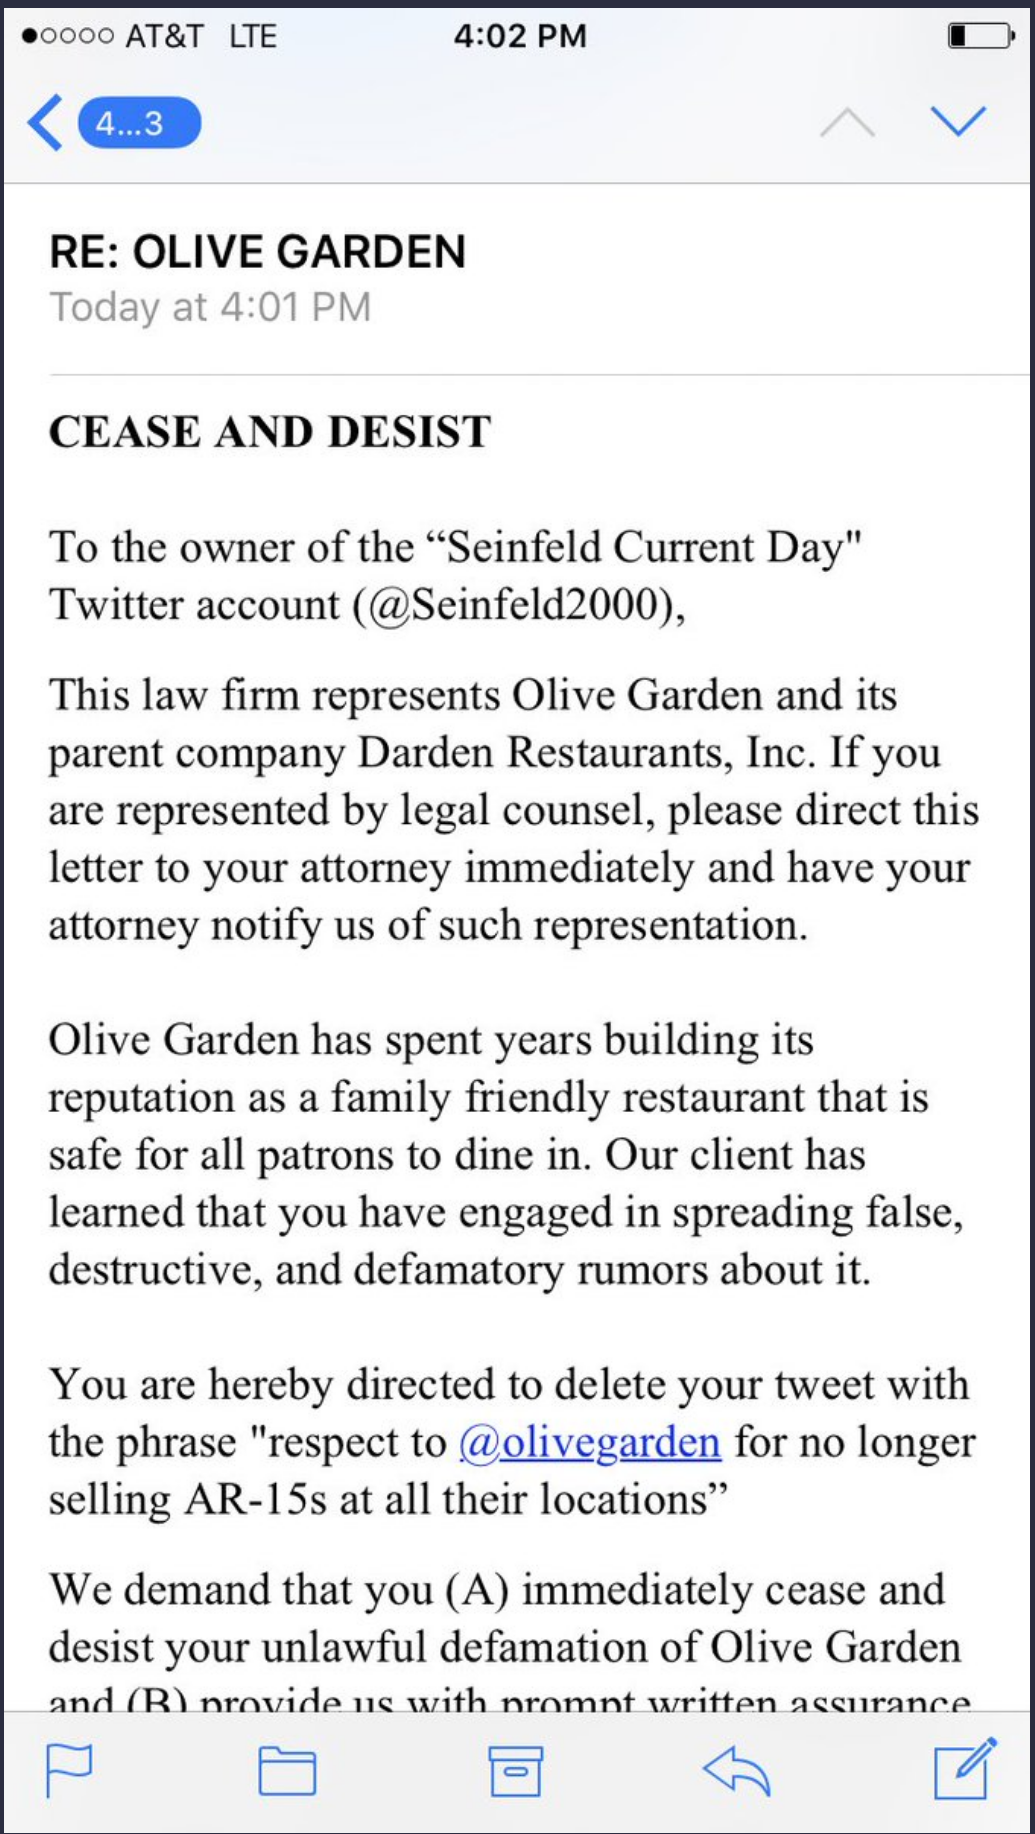 olive garden meme - web page - 0000 At&T Lte 4 Re Olive Garden Today at Cease And Desist To the owner of the